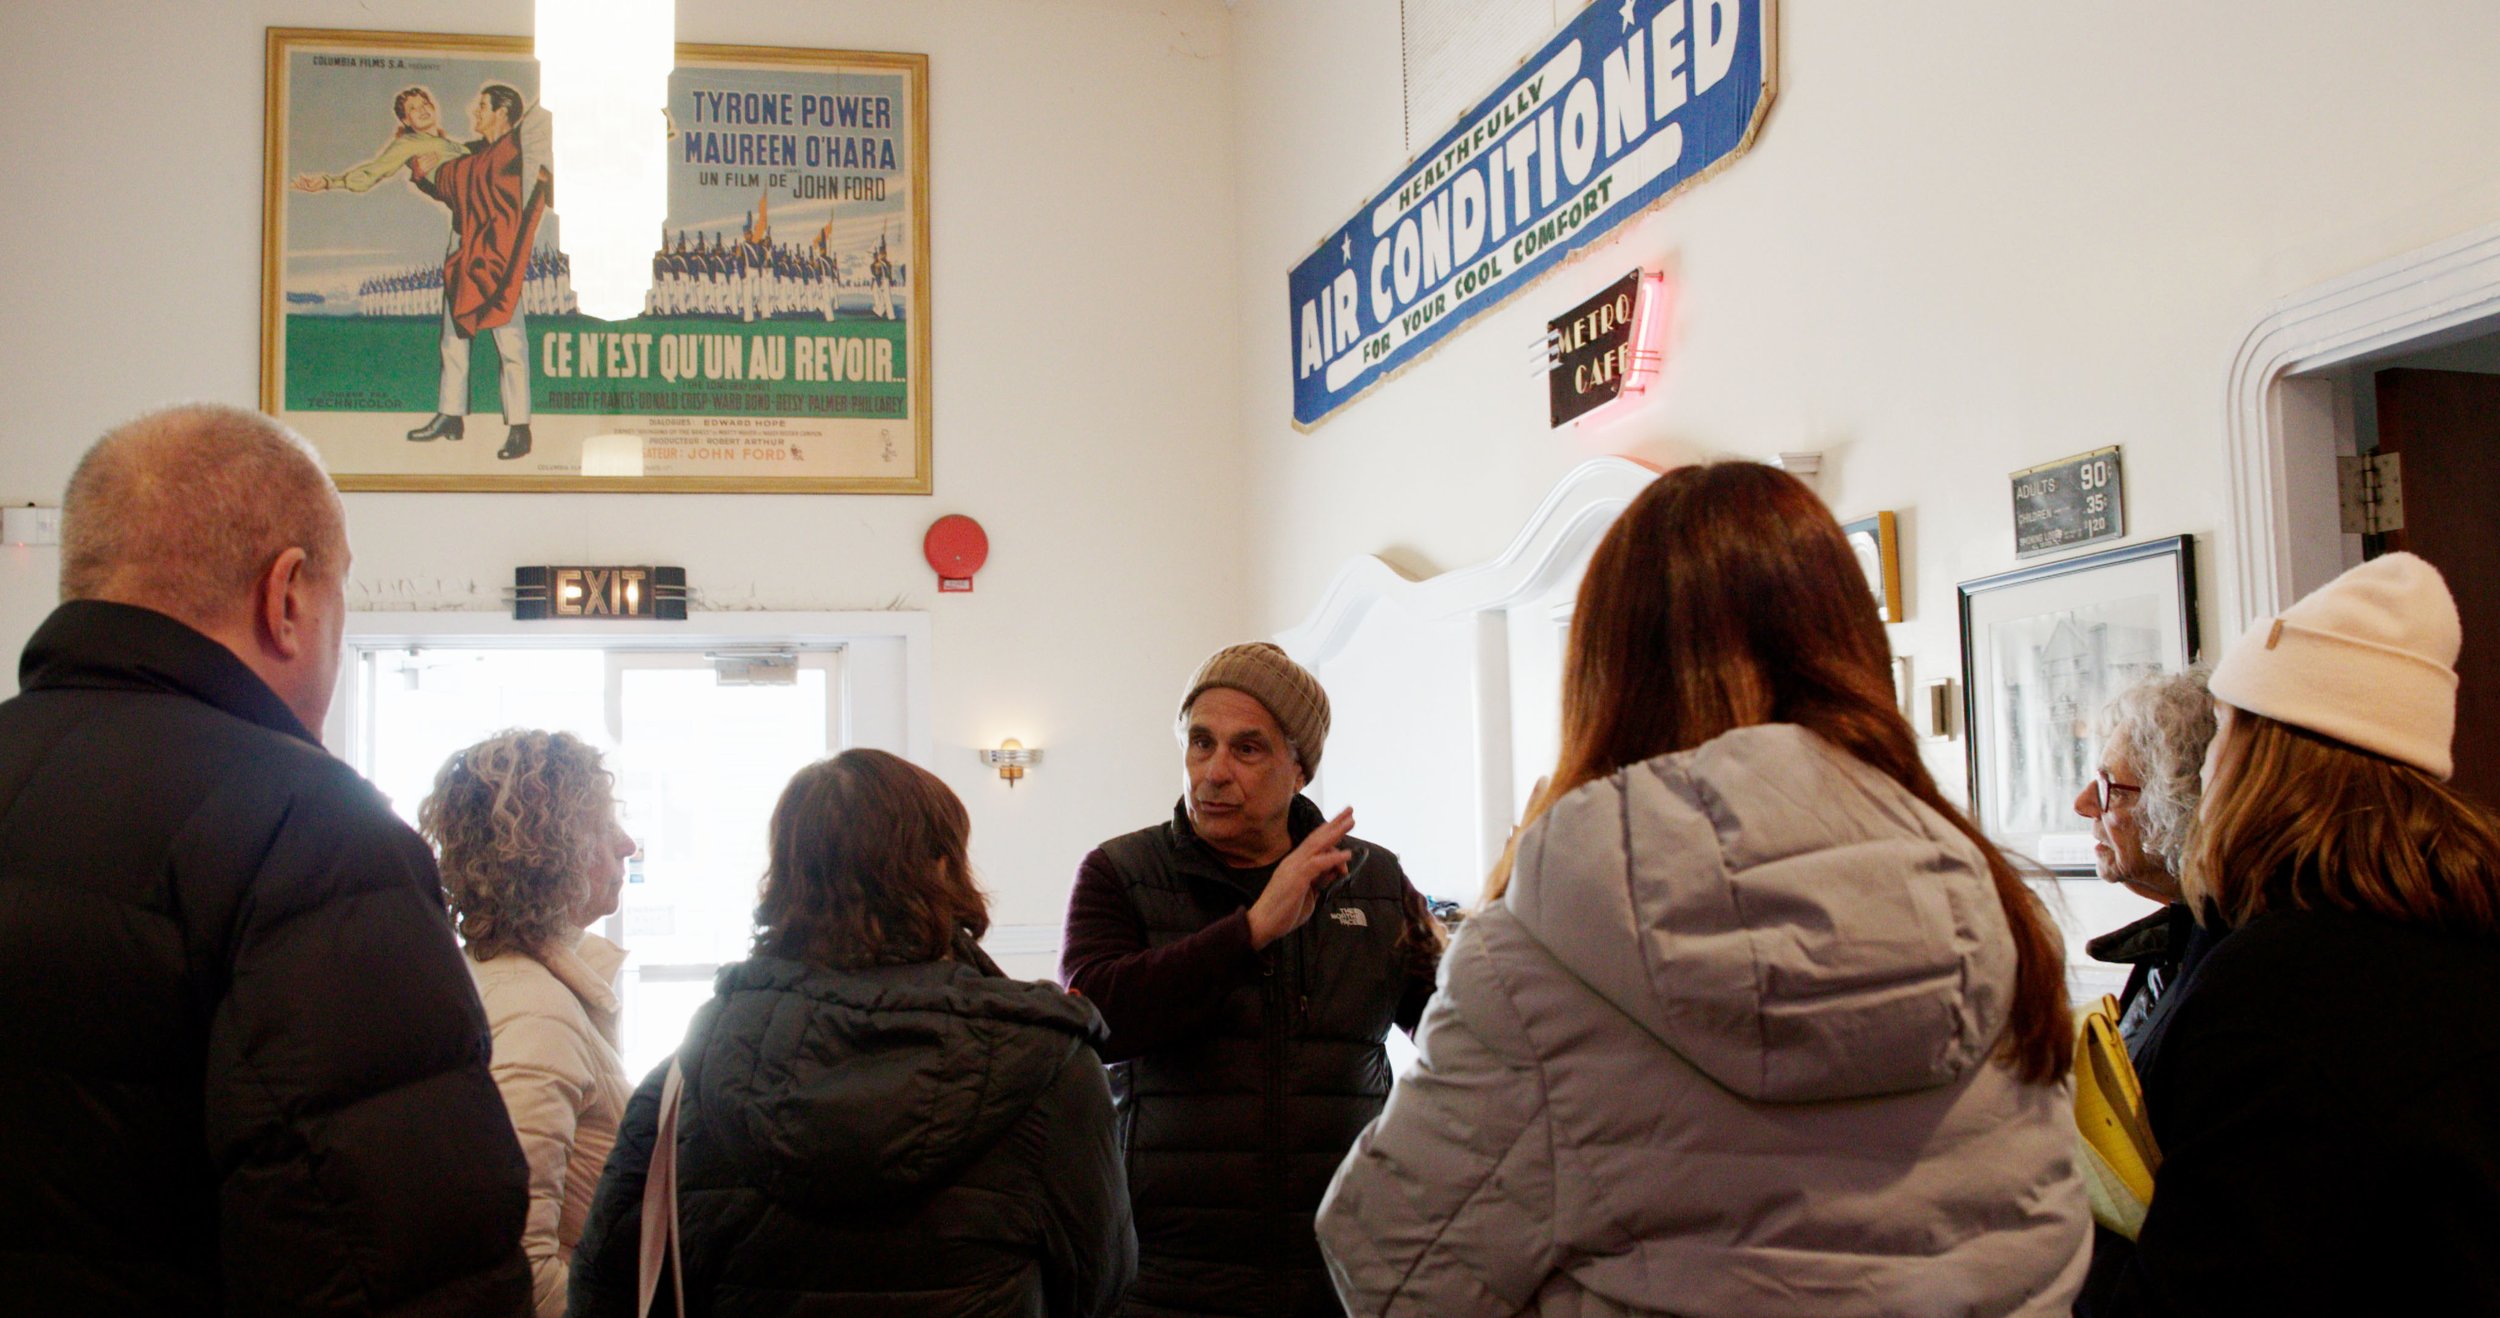 Tony Spiridakis conducting a tour of the Greenport Theatre, soon to be North Fork Arts Center